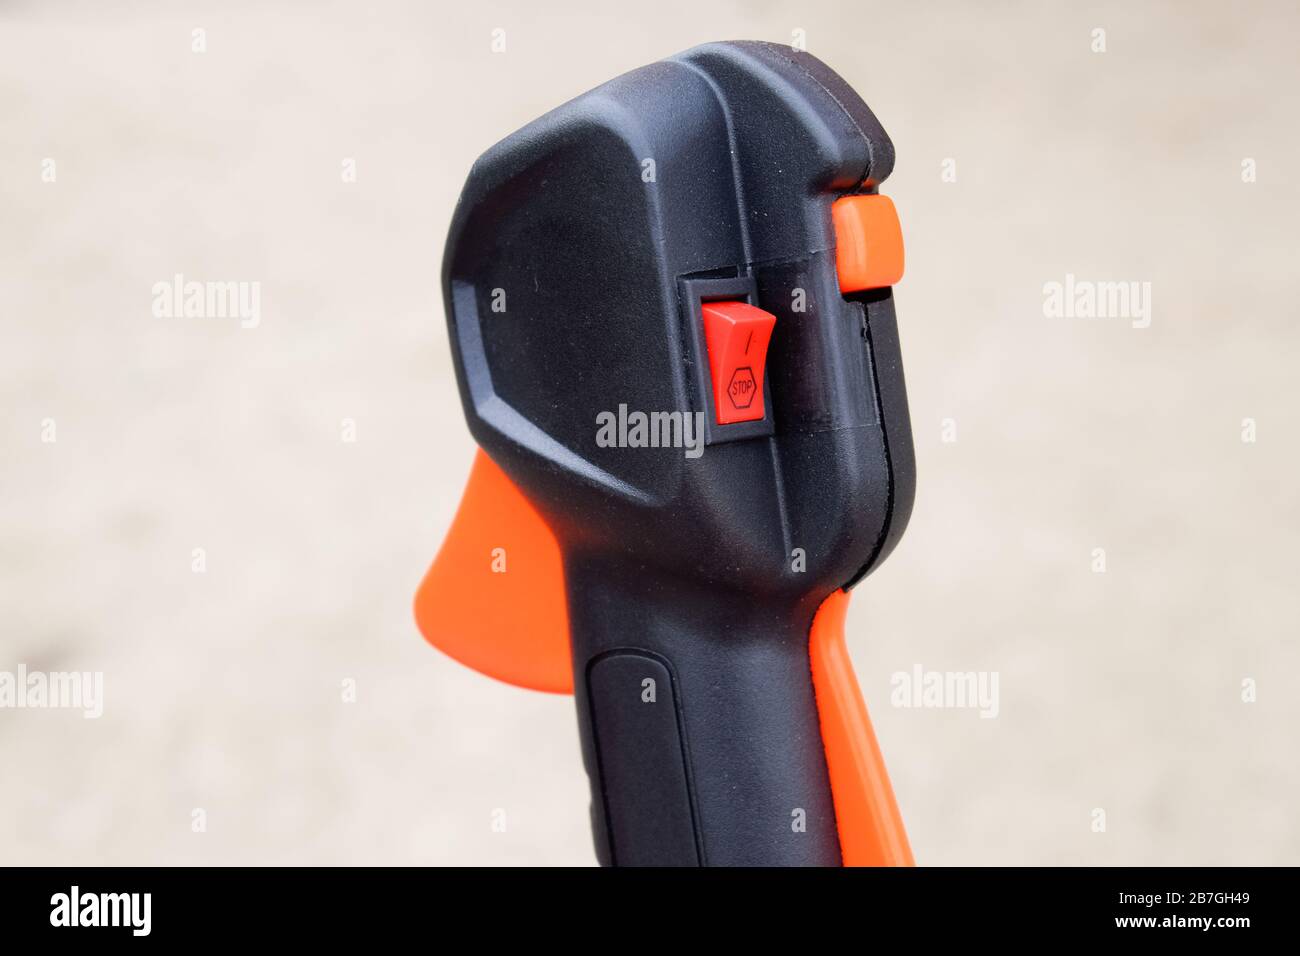 Knob with trimmer controls. Gas trimmer, equipment controls. Trimer gascosis with a leaf for mowing grass and shrubs. Stock Photo